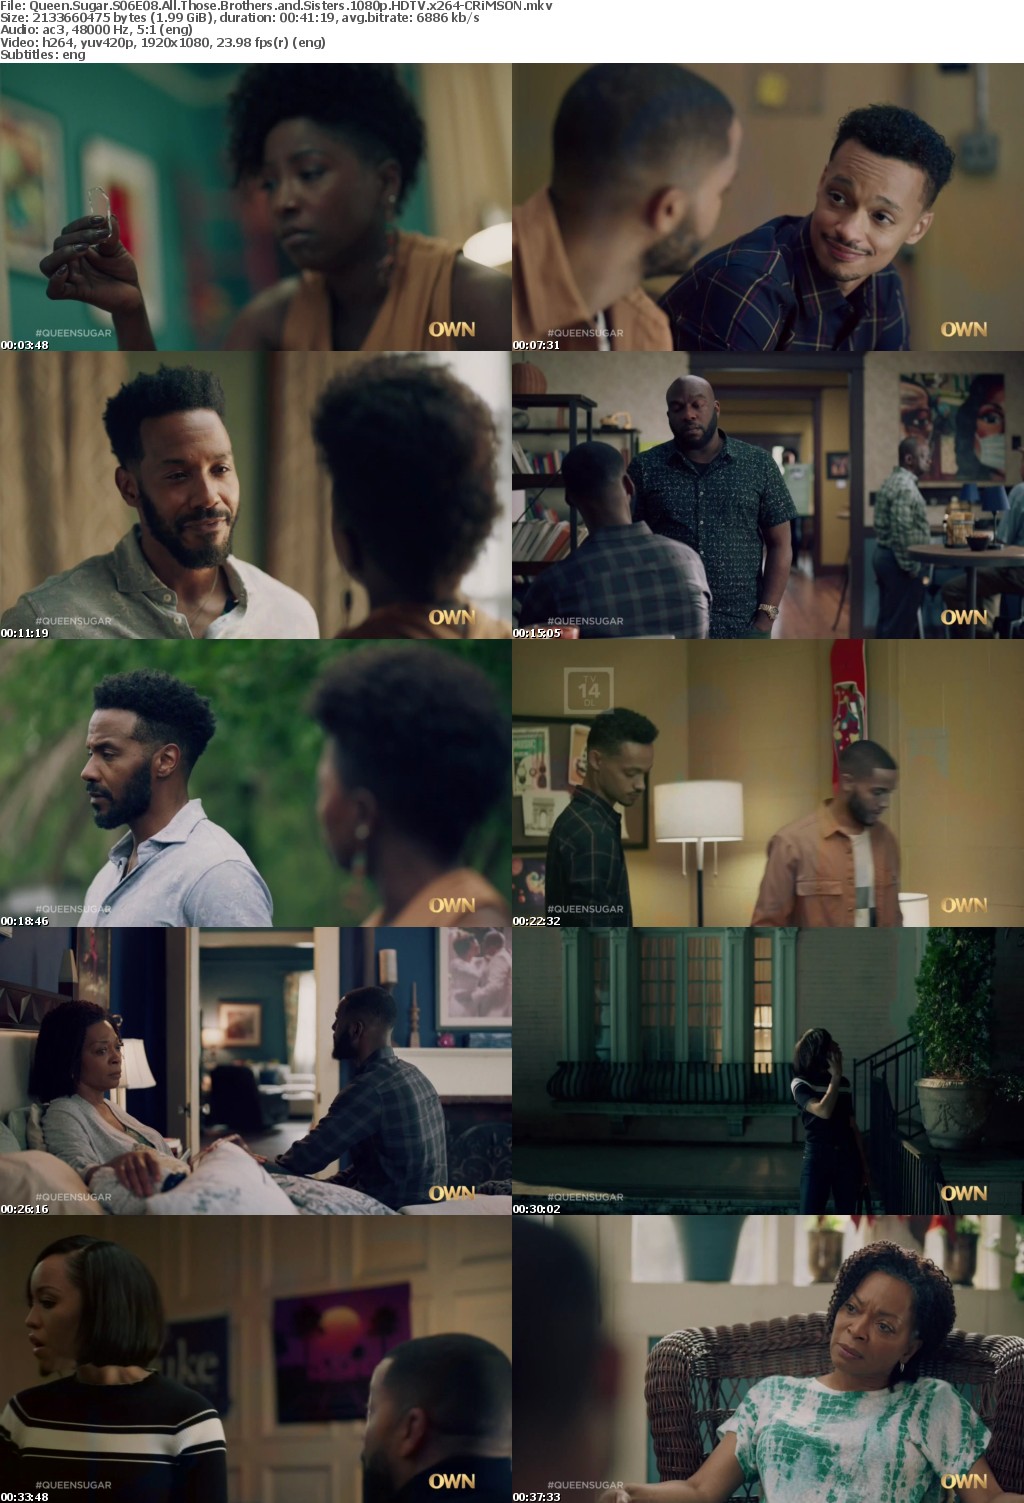 Queen Sugar S06E08 All Those Brothers and Sisters 1080p HDTV x264-CRiMSON